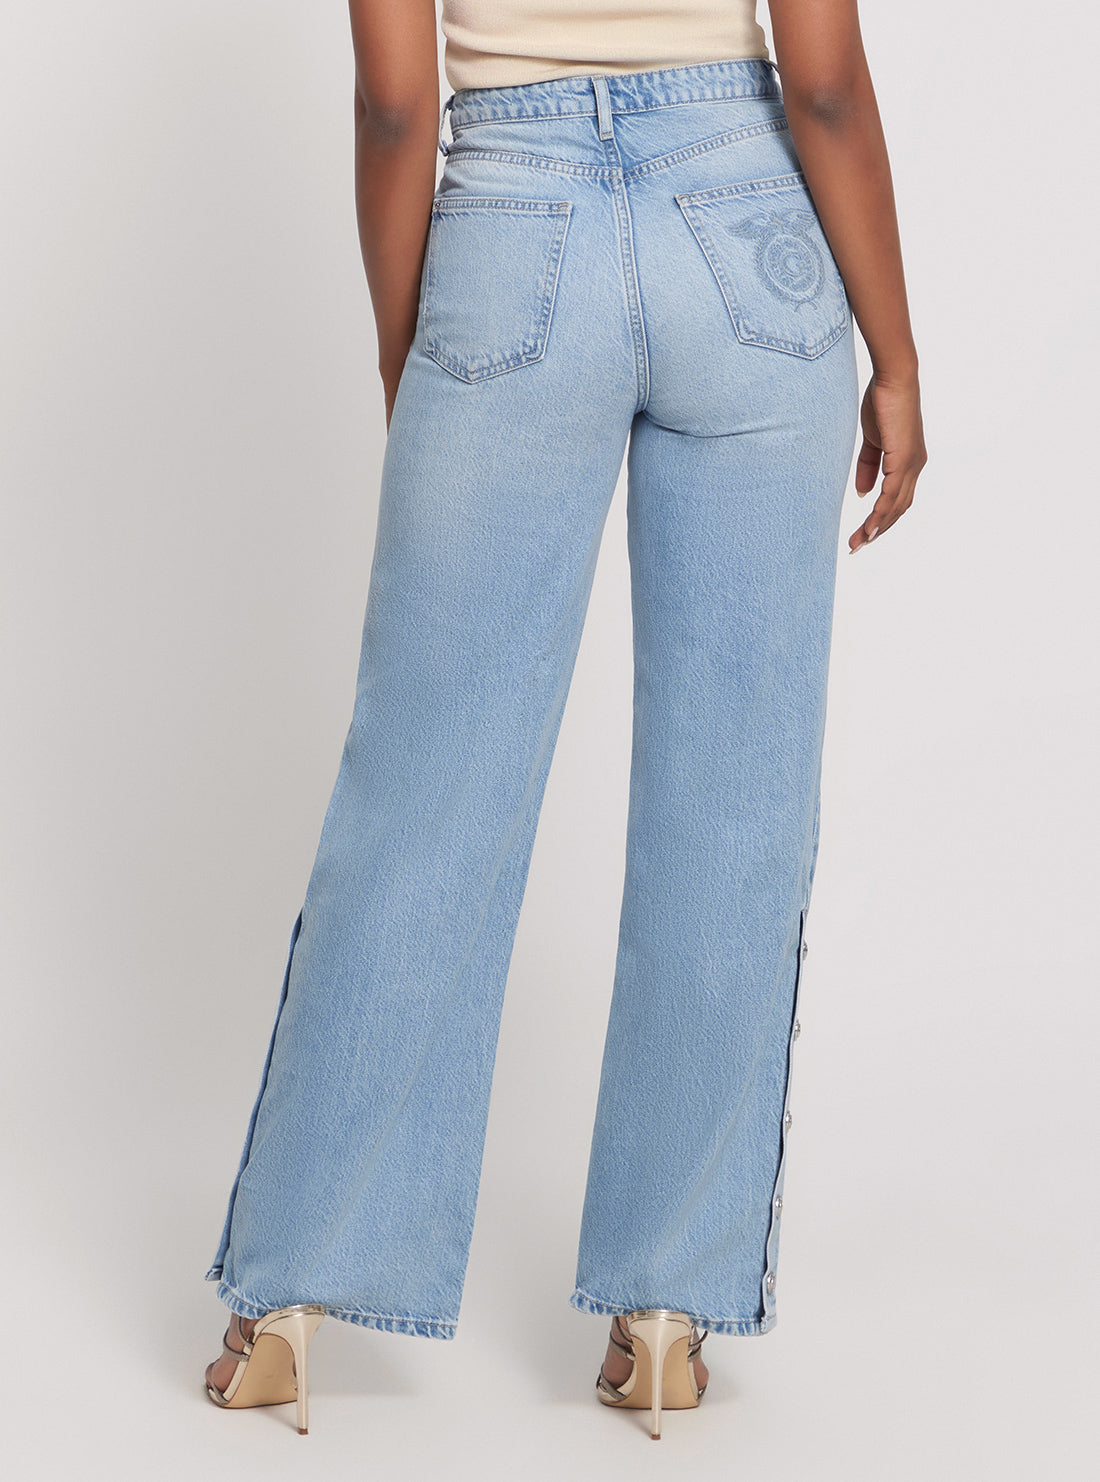 GUESS High-Rise Paz Wide Leg Denim Jeans in Light Wash back view